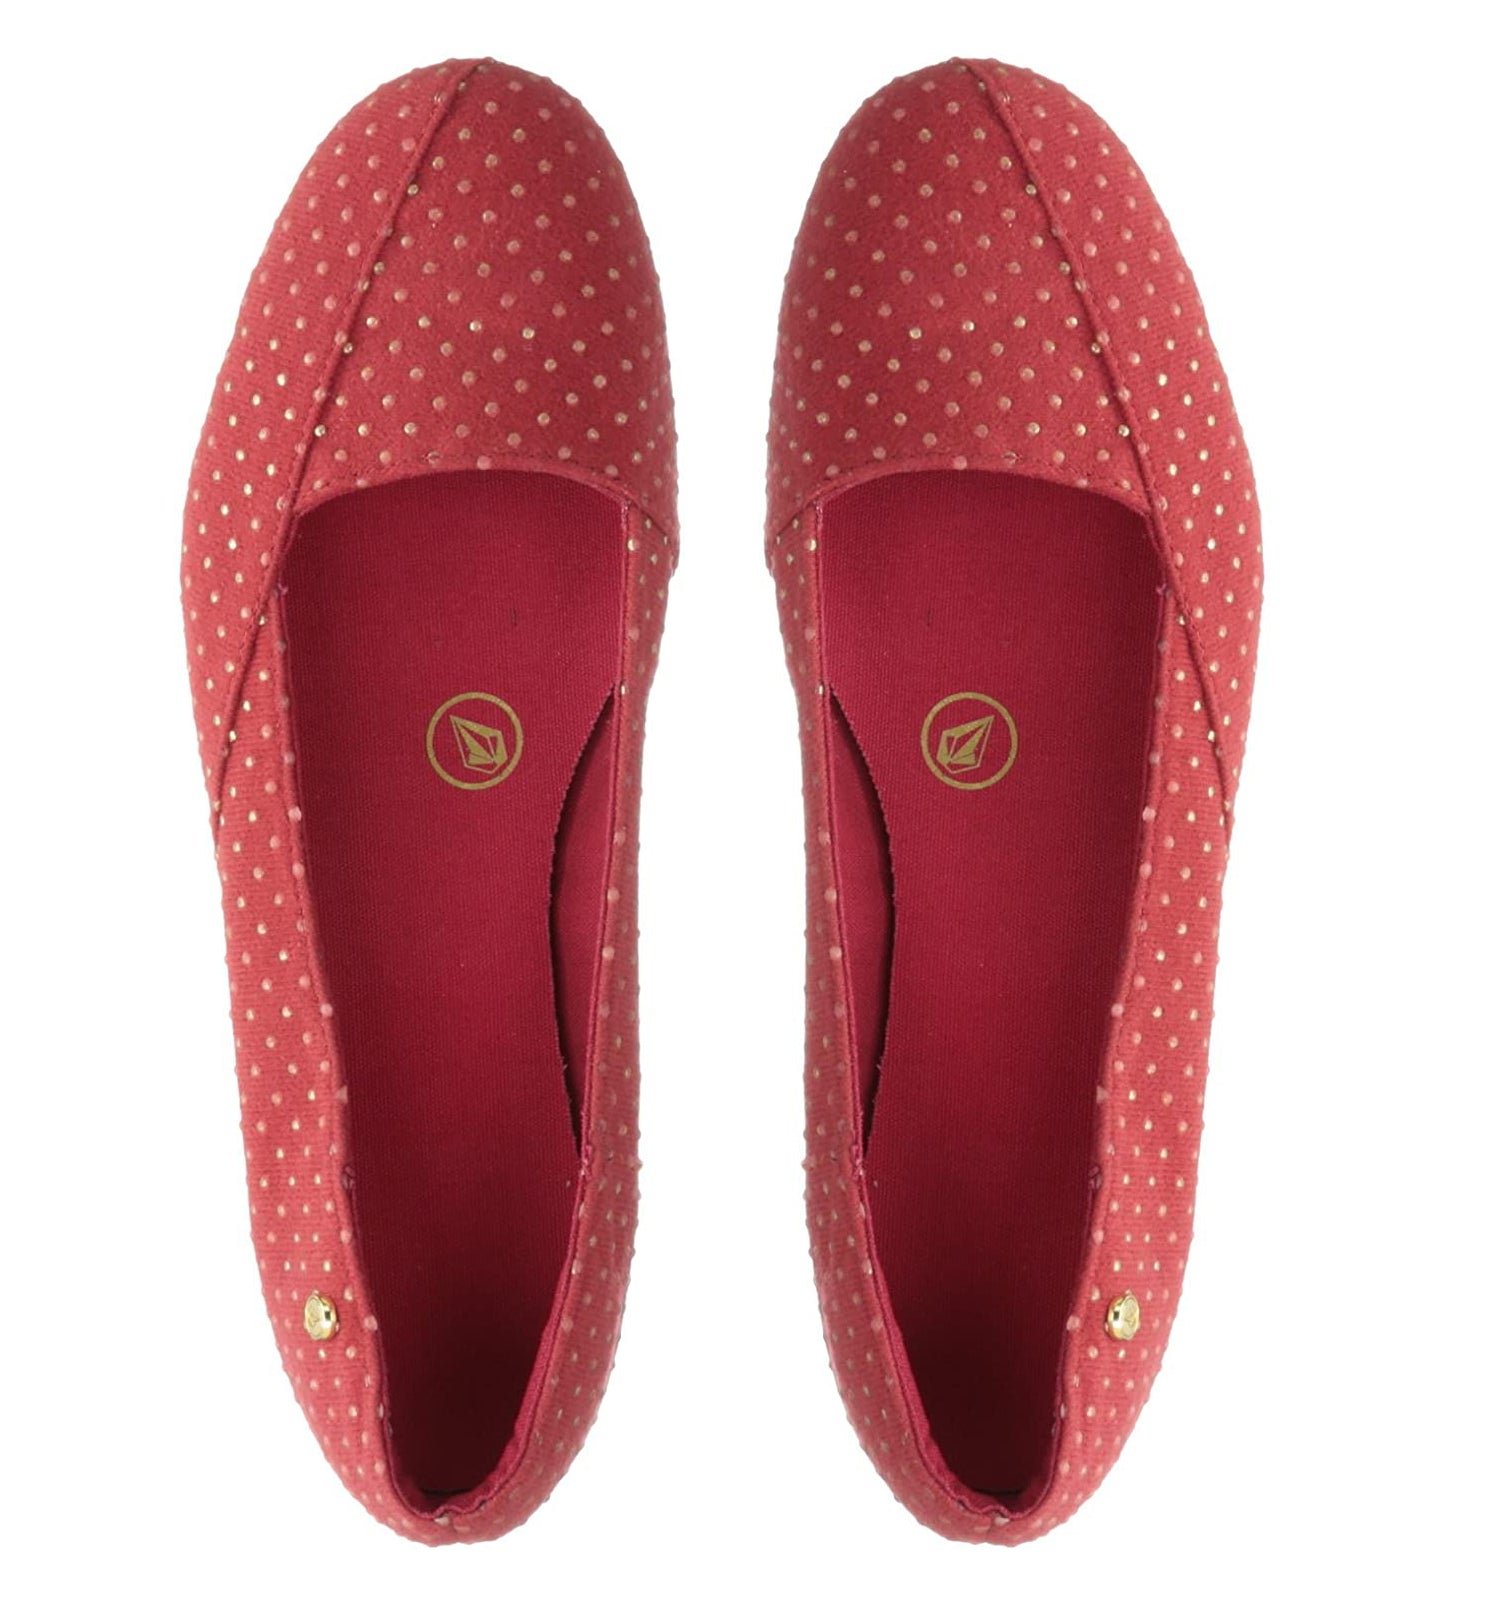 Volcom Game On Womens Shoe Red Studs 6